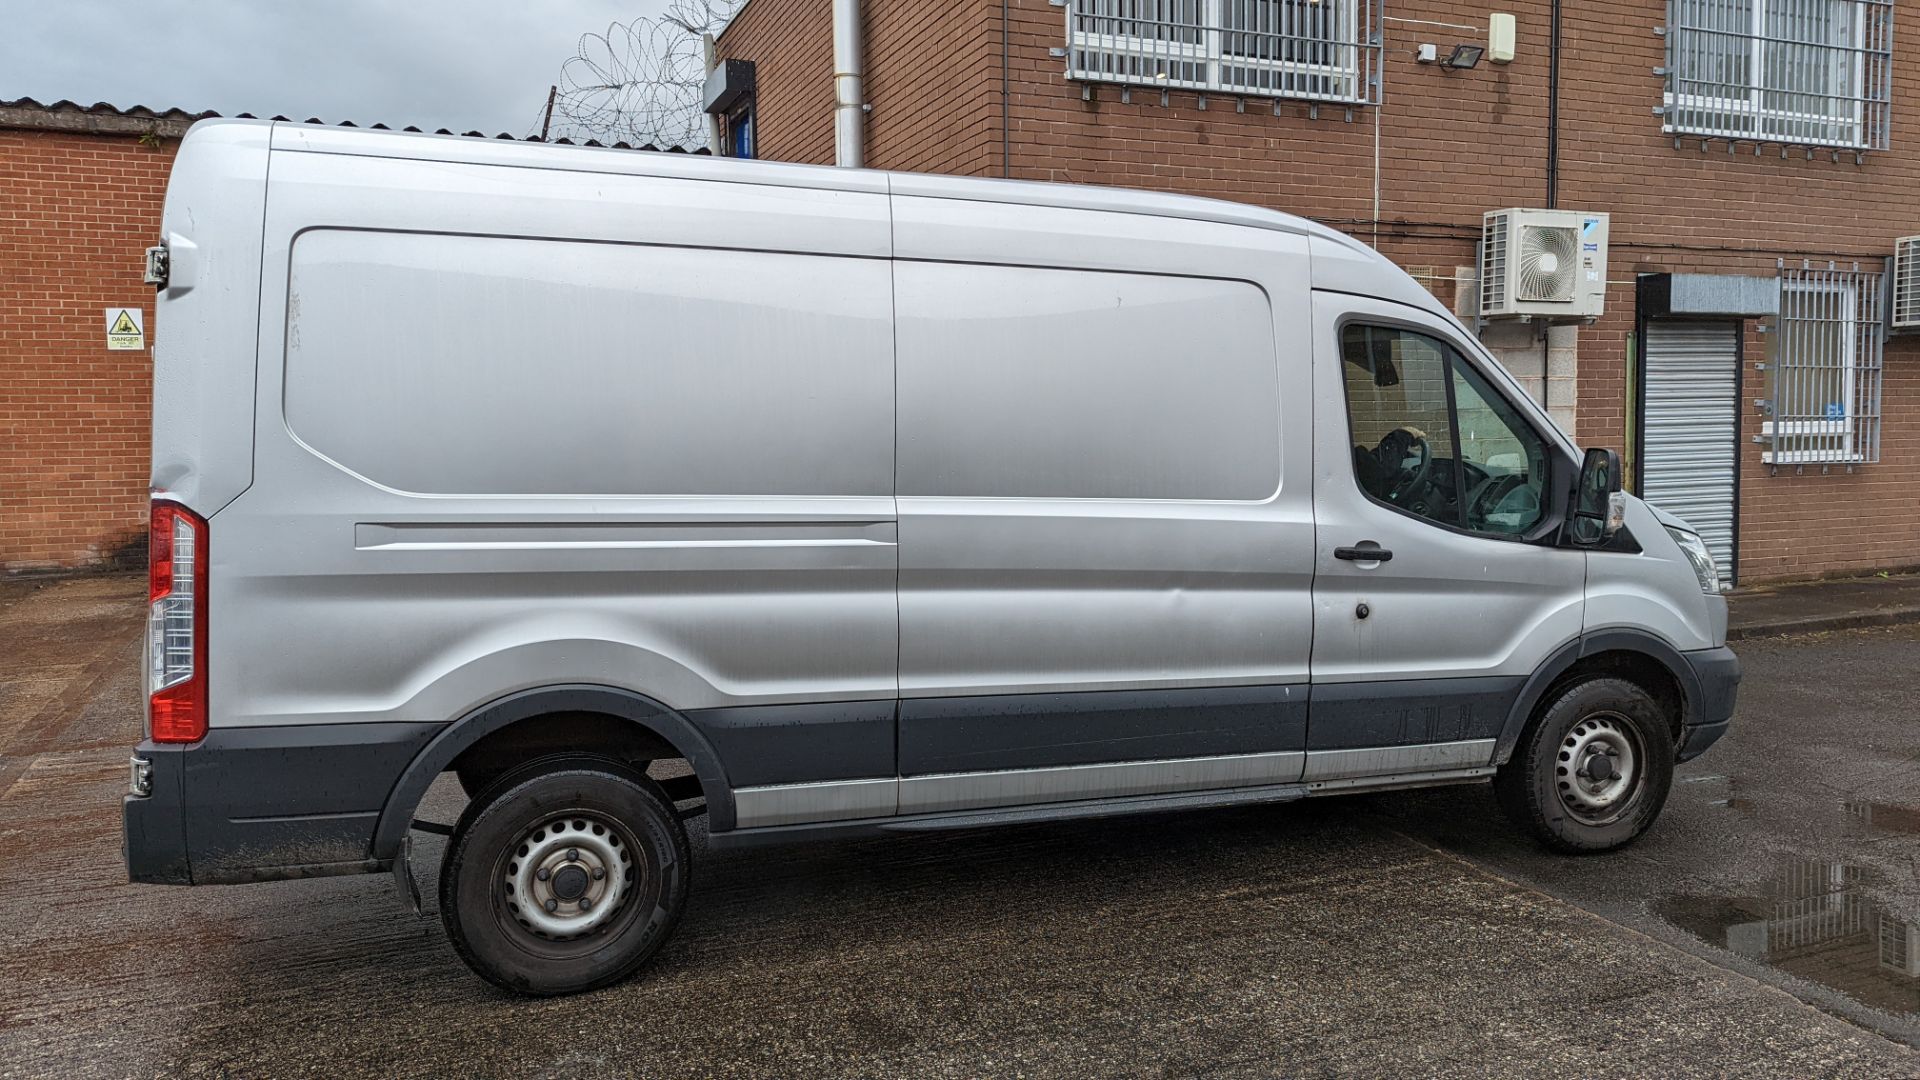 MD65 WHH Ford Transit 350, 6-speed manual gearbox, 2198cc diesel engine, 5981mm x 2550mm. Colour: Si - Image 26 of 51